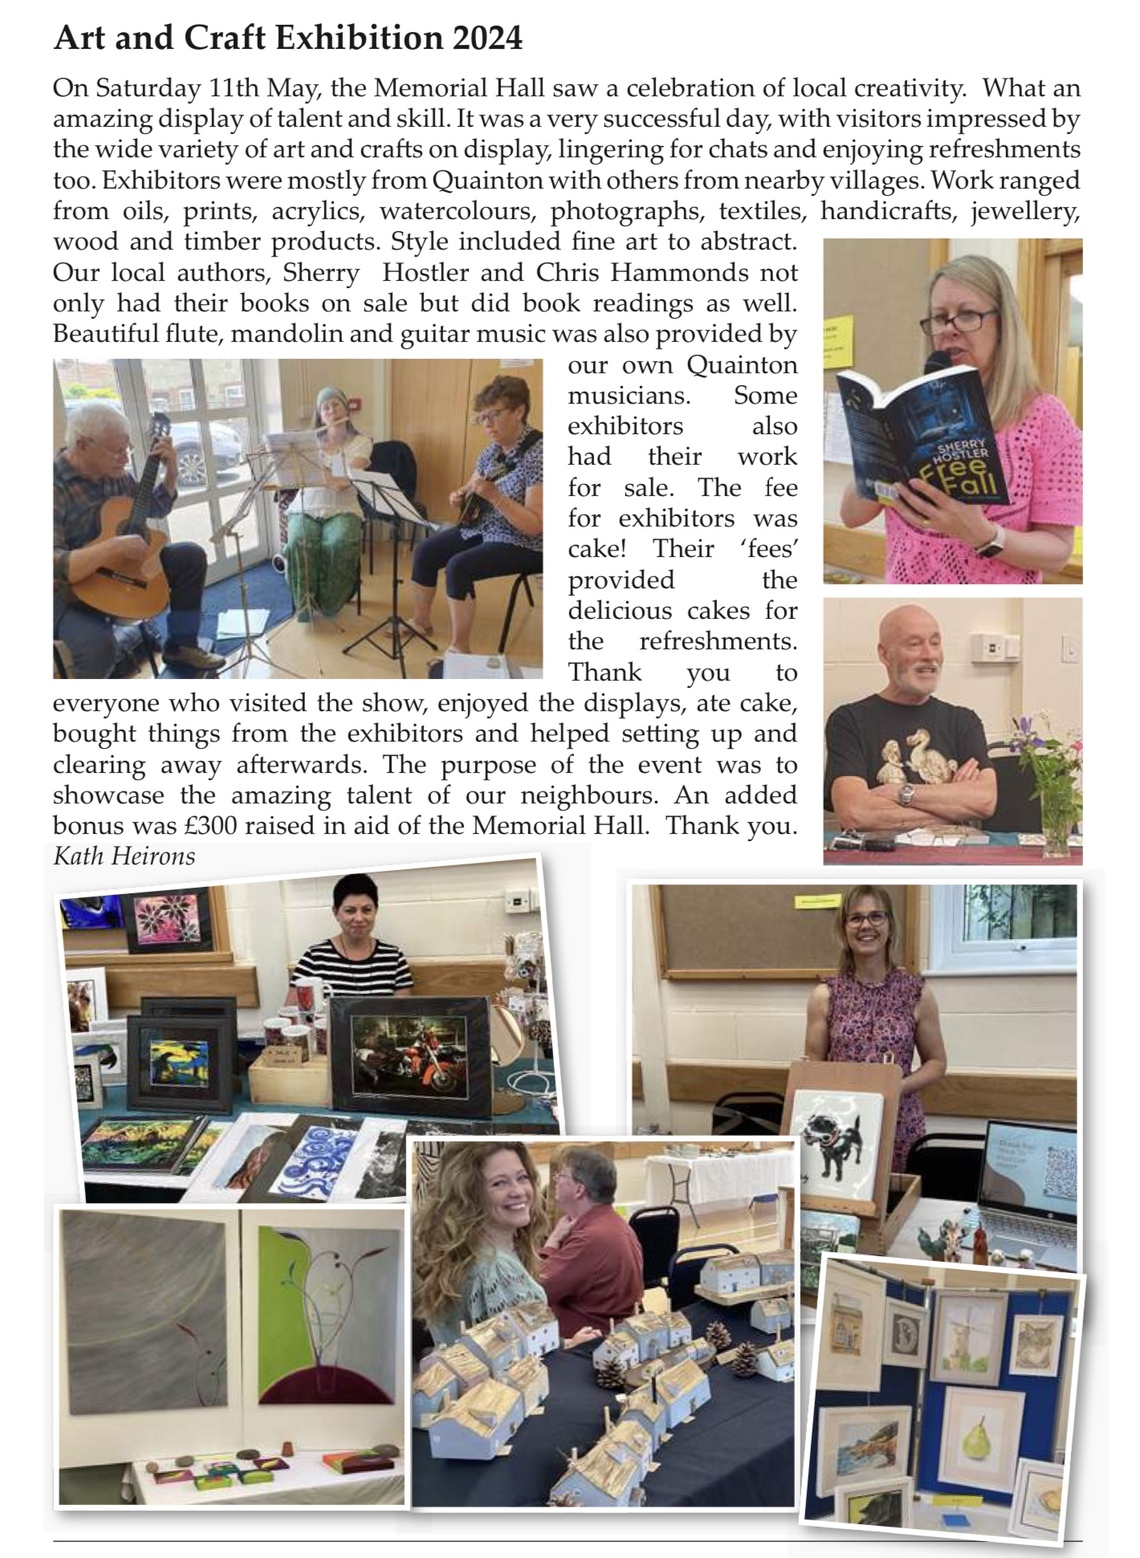 Art and Craft Show 2024 report